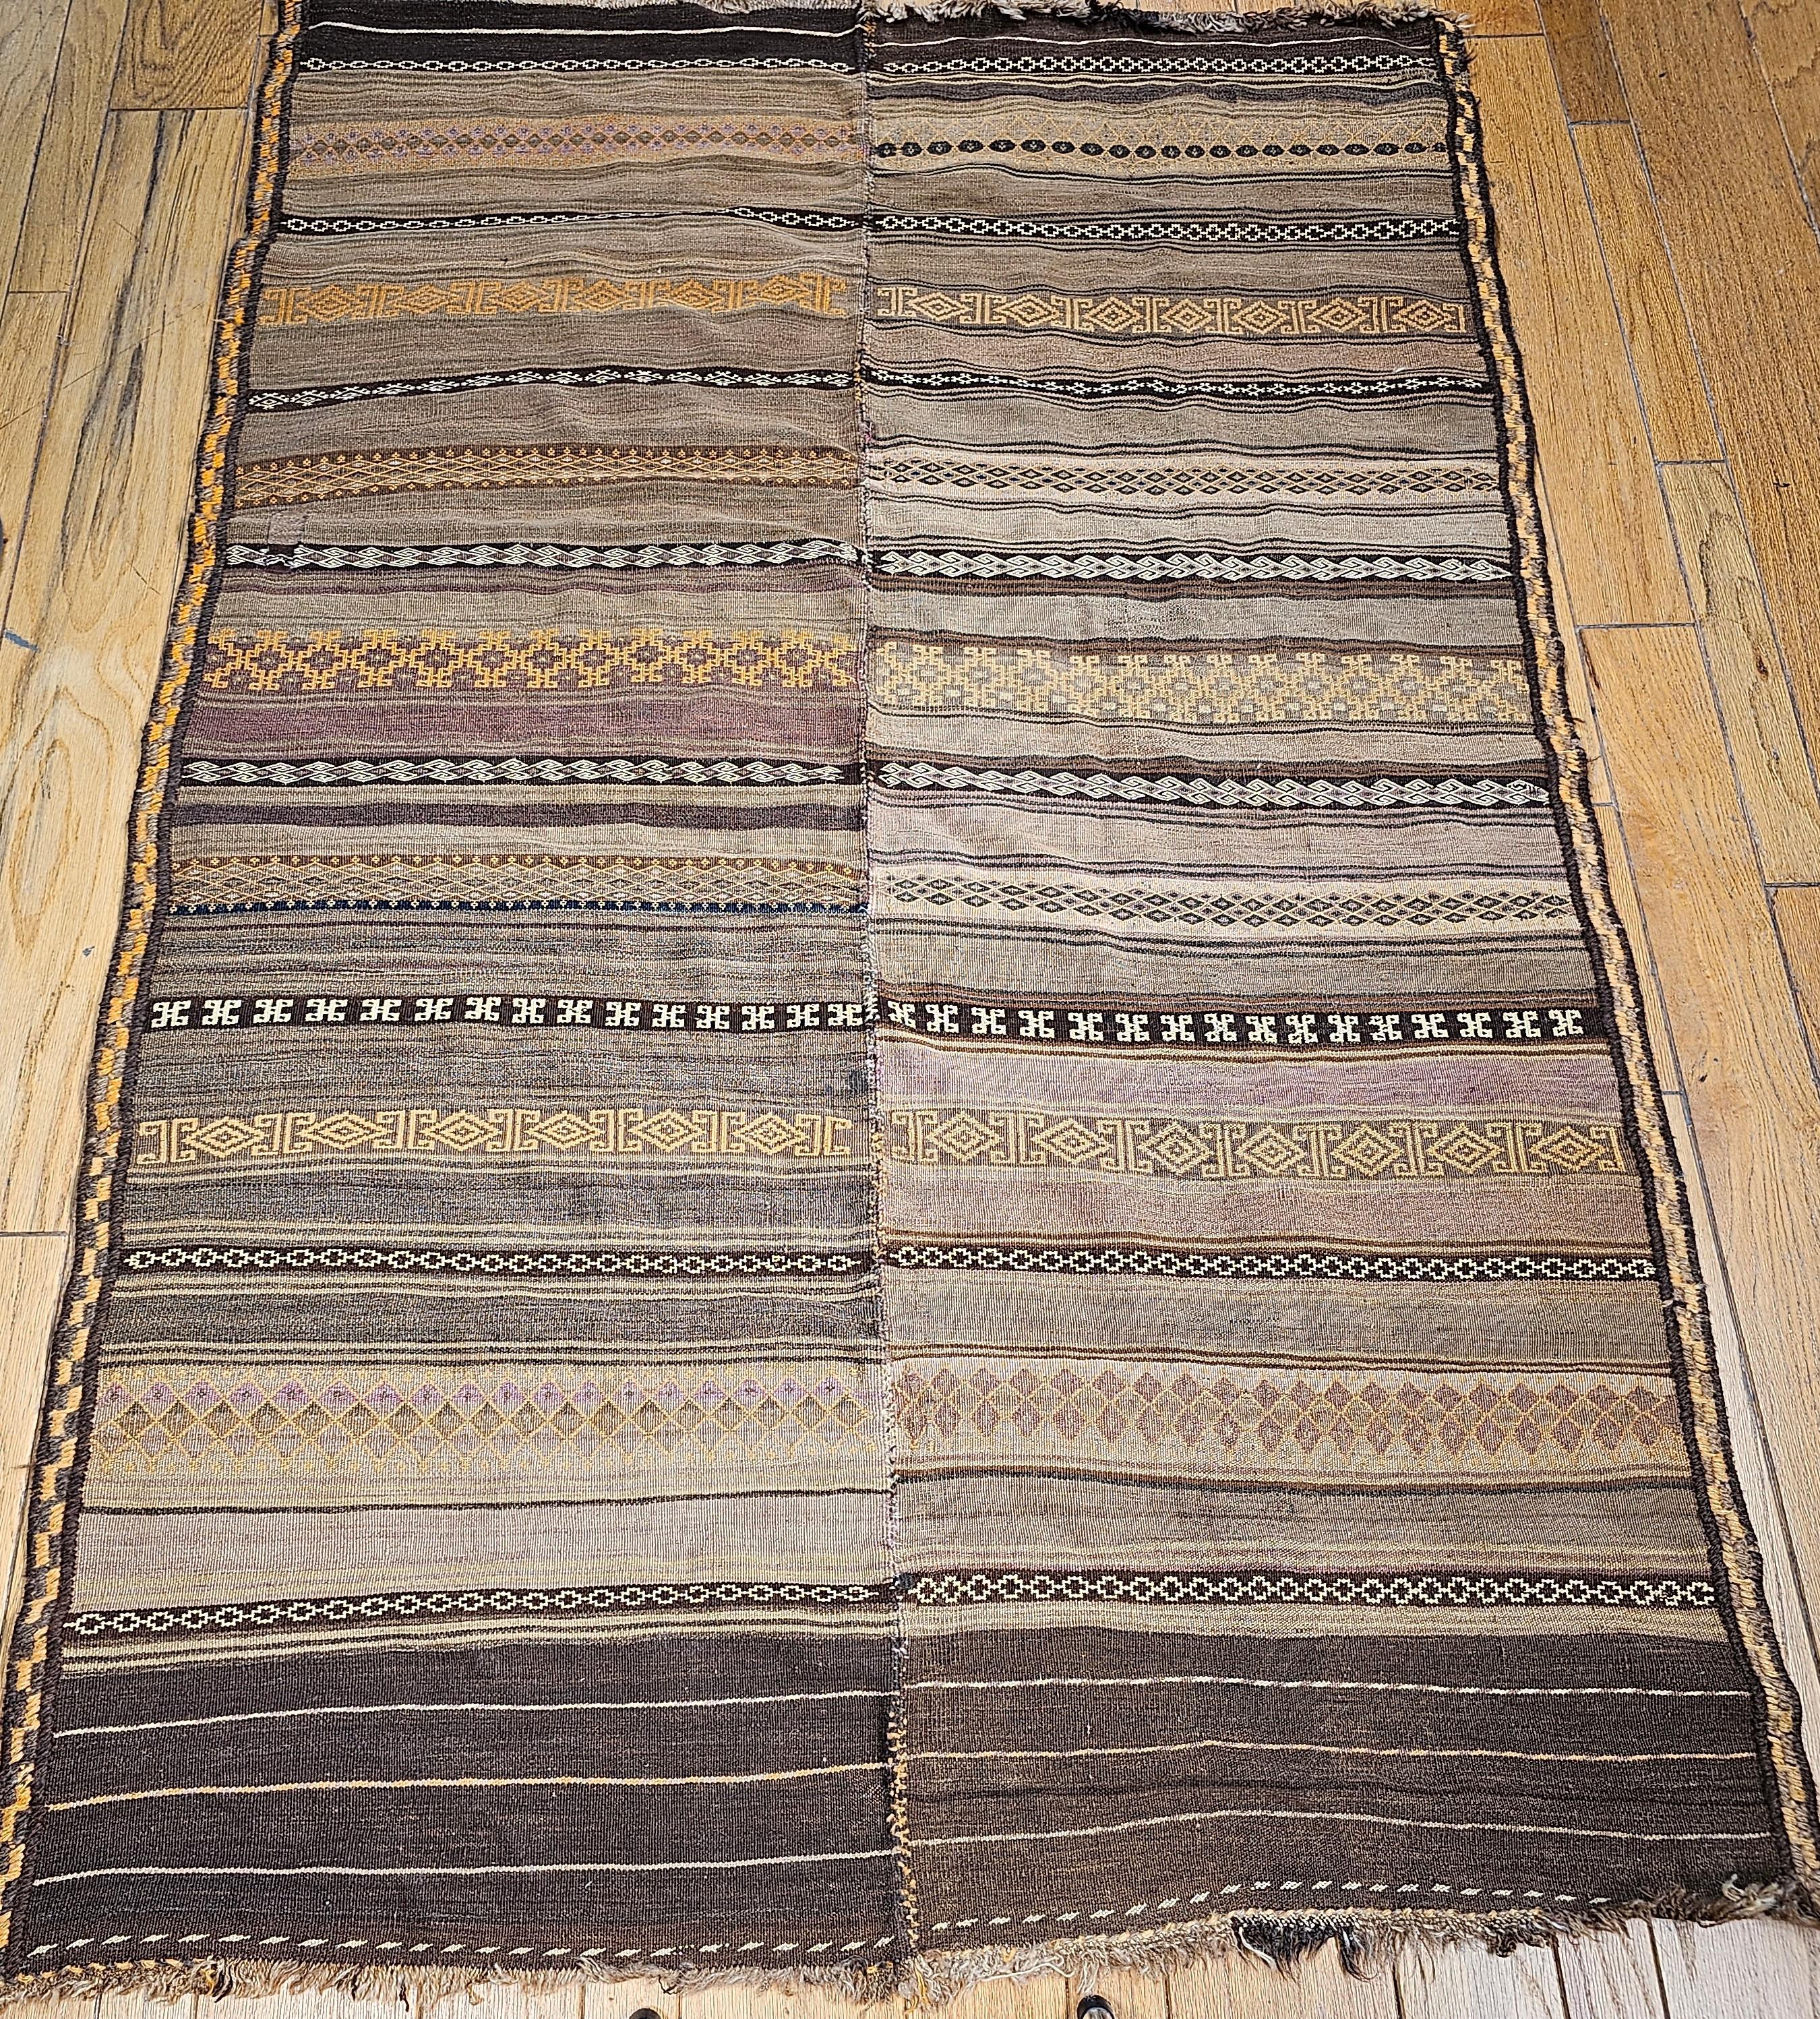 Vintage Uzbek flat woven soumak kilim from Central Asia from the early 1900s.  The Uzbek Kilim is woven in the soumak method with rows of different designs in ivory, brown, green, burgundy, and lavender colors.  The Kilim is a great representation